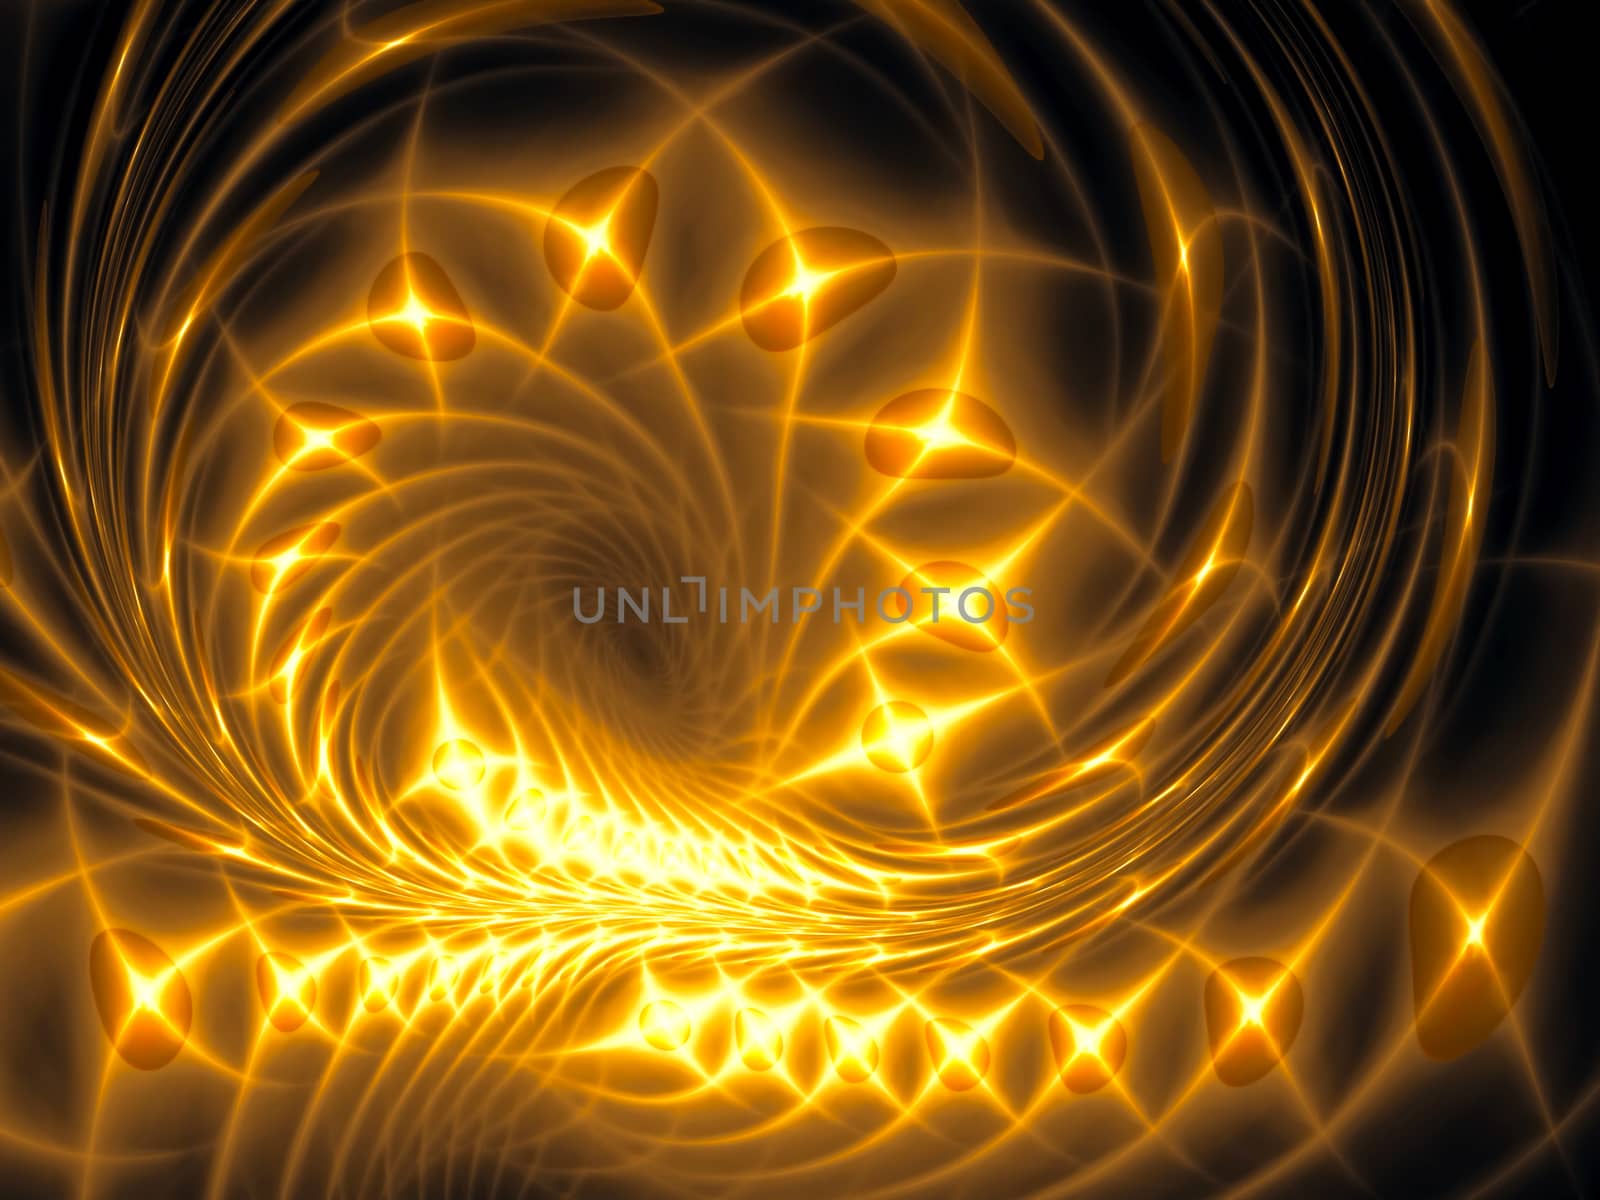 Abstract fractal background - computer-generated image. Modern digital art: bright glowing spiral with sparkles. For desktop wallpaper, web design, covers.